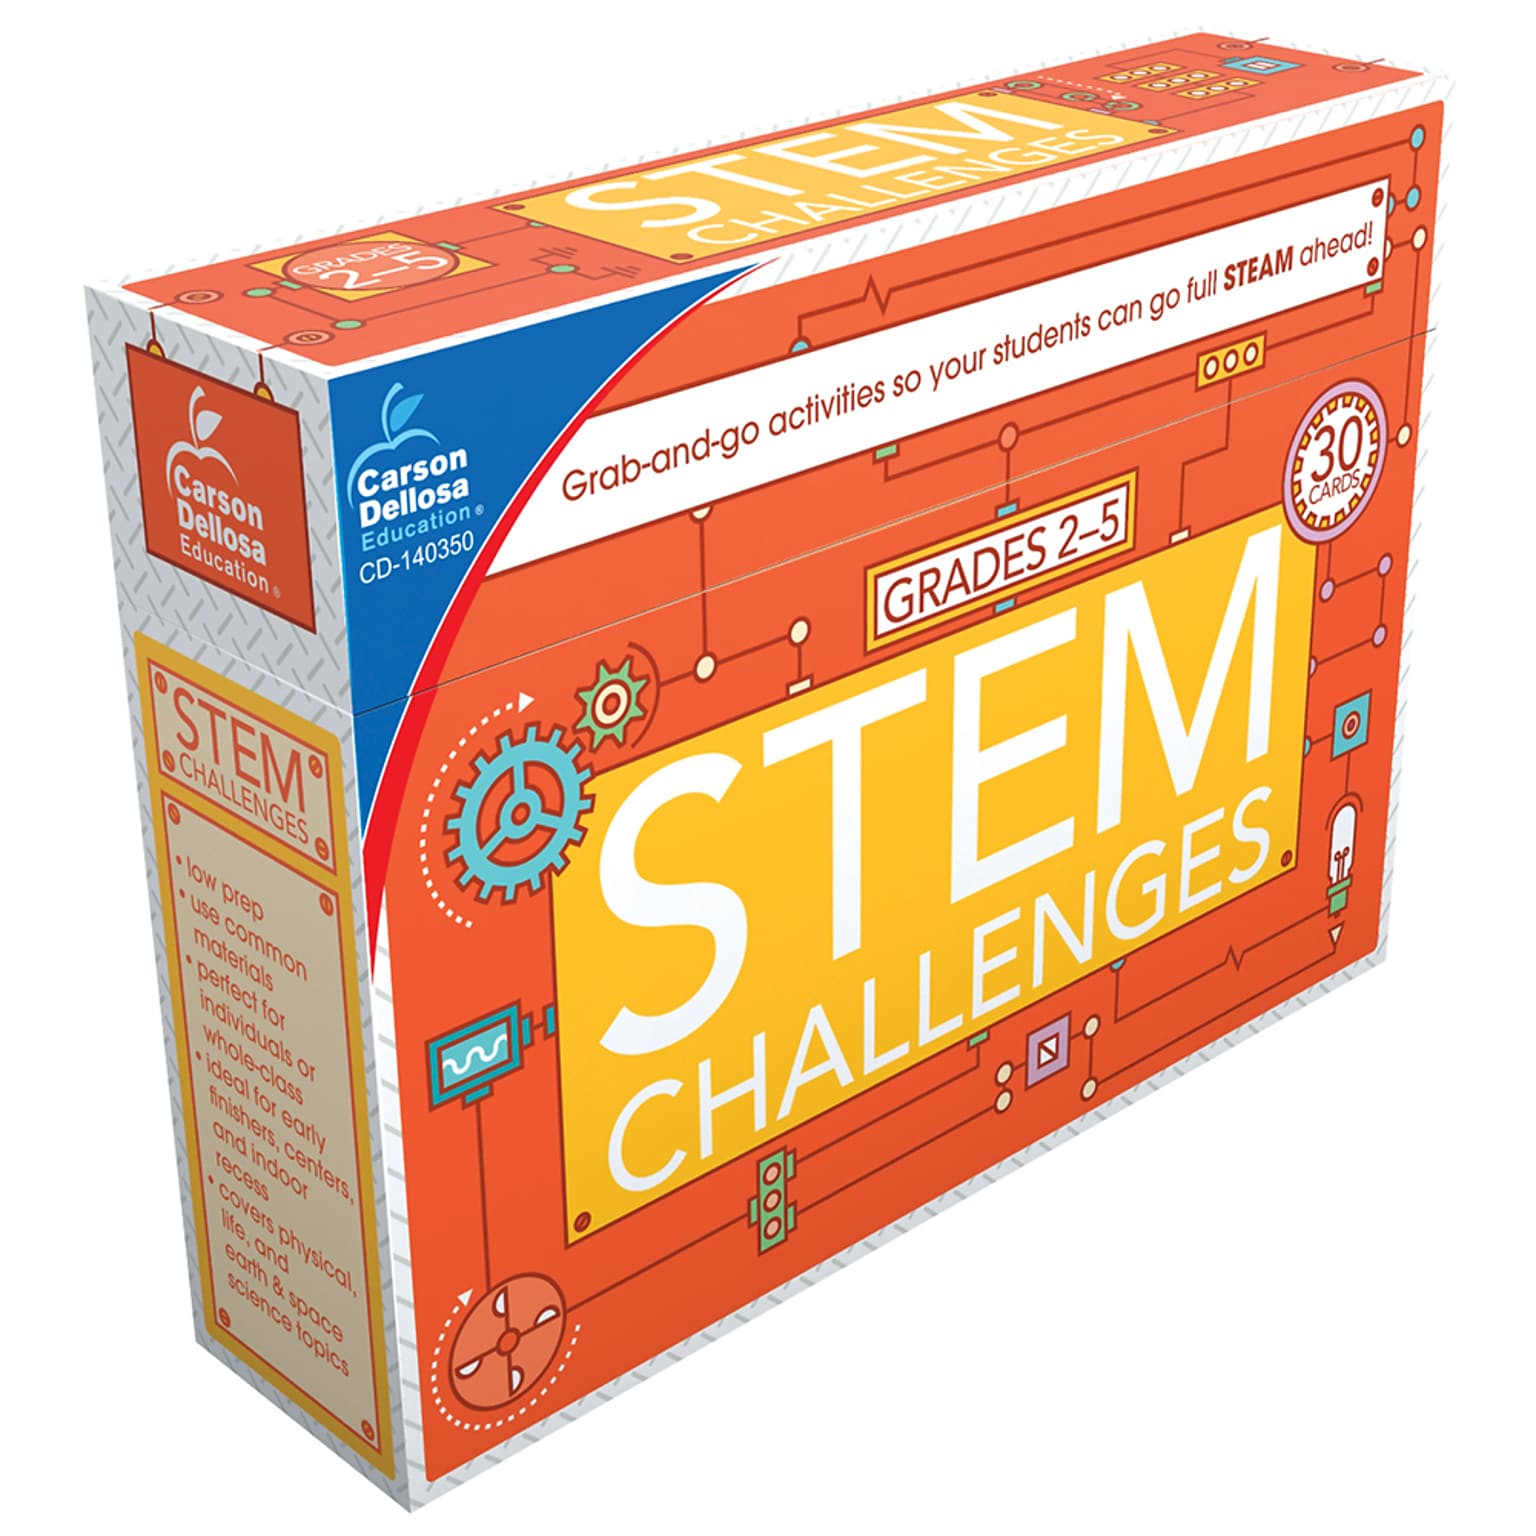 Carson-Dellosa Learning Cards Stem Challenges Grades 2–5 33 Pieces (140350)